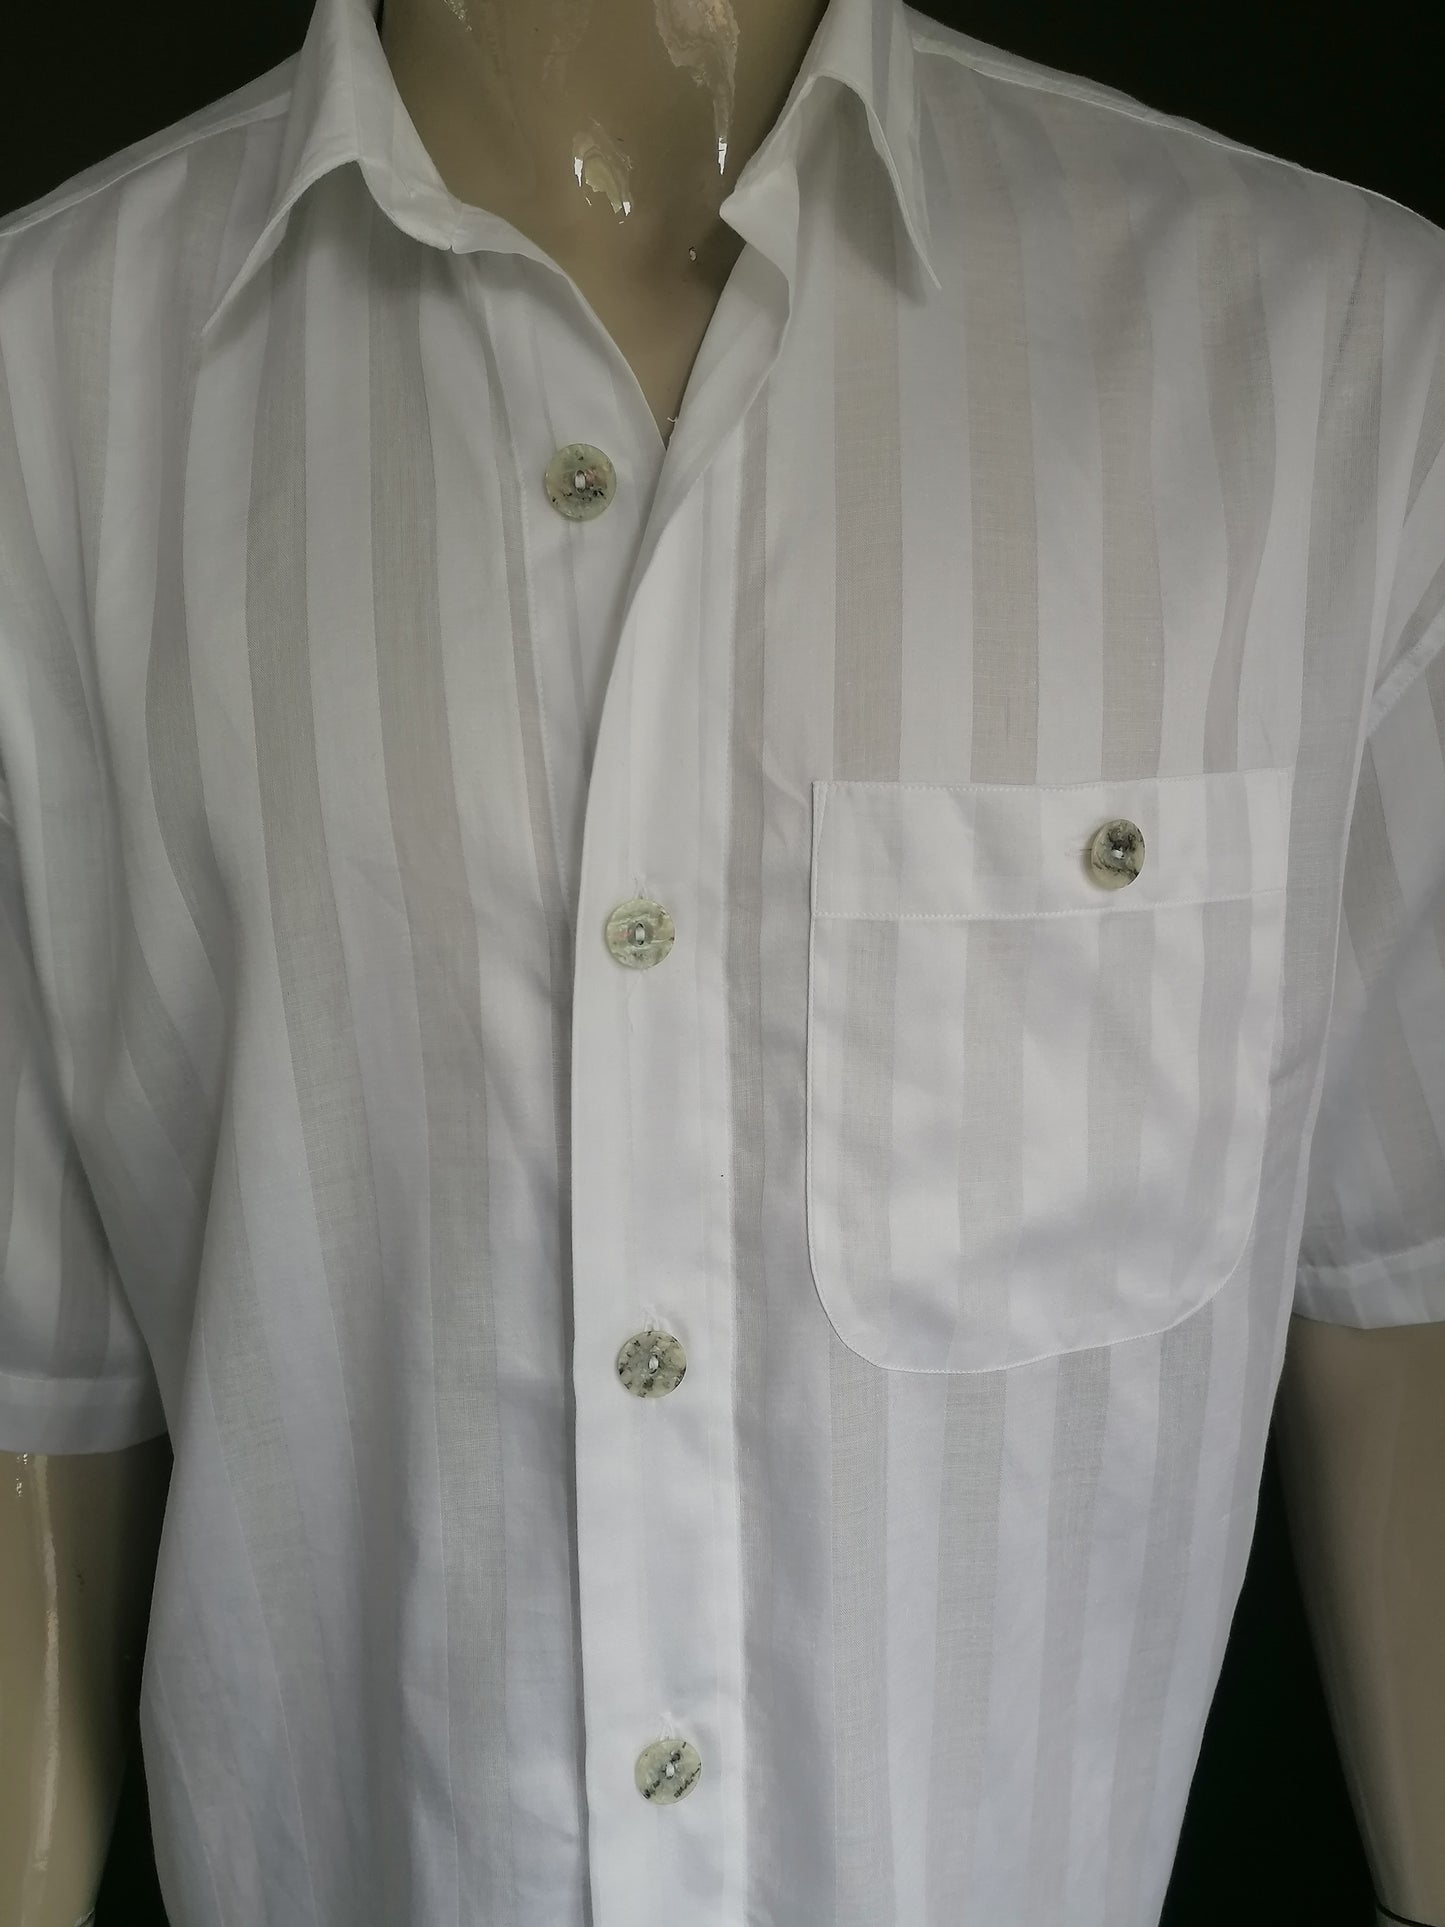 Vintage Signum shirt short sleeve and larger buttons. White striped motif. Size XL.